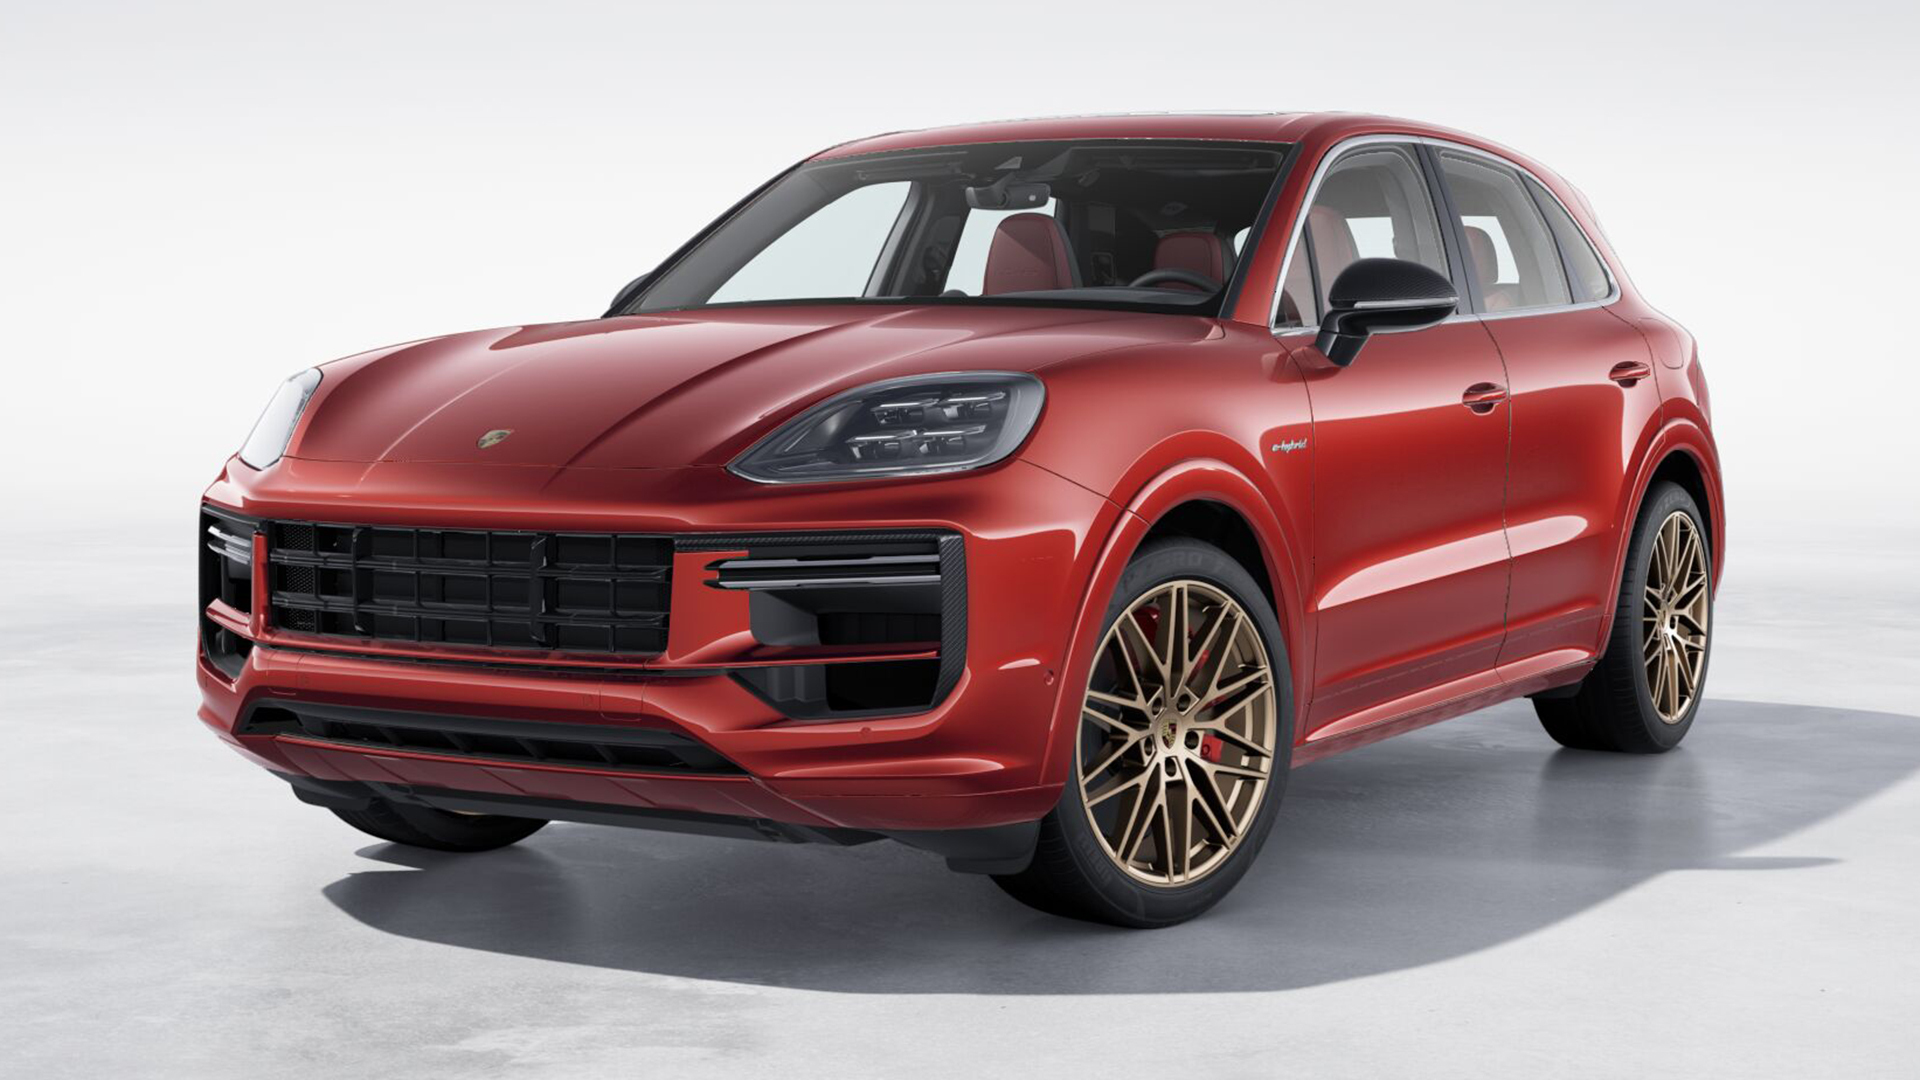 2024 Porsche Cayenne Review: Spicy Enough for Hot Ones